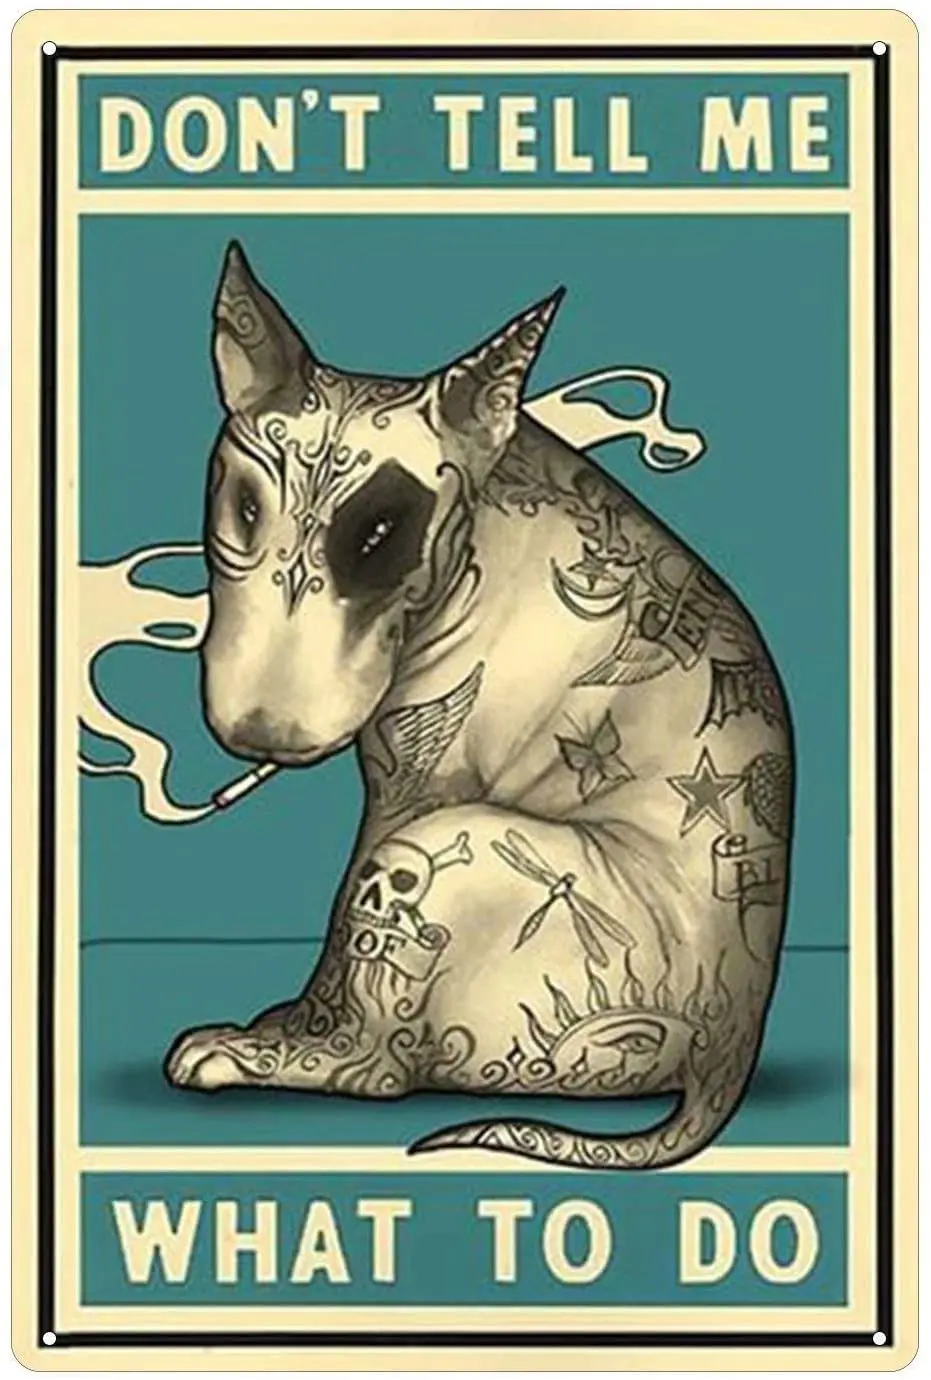 

Bull Terrier Metal Tin Sign, Dont Tell Me What to Do Wall Decor Retro Bar Pub Diner Cafe Home Bathroom and Room Art Poster